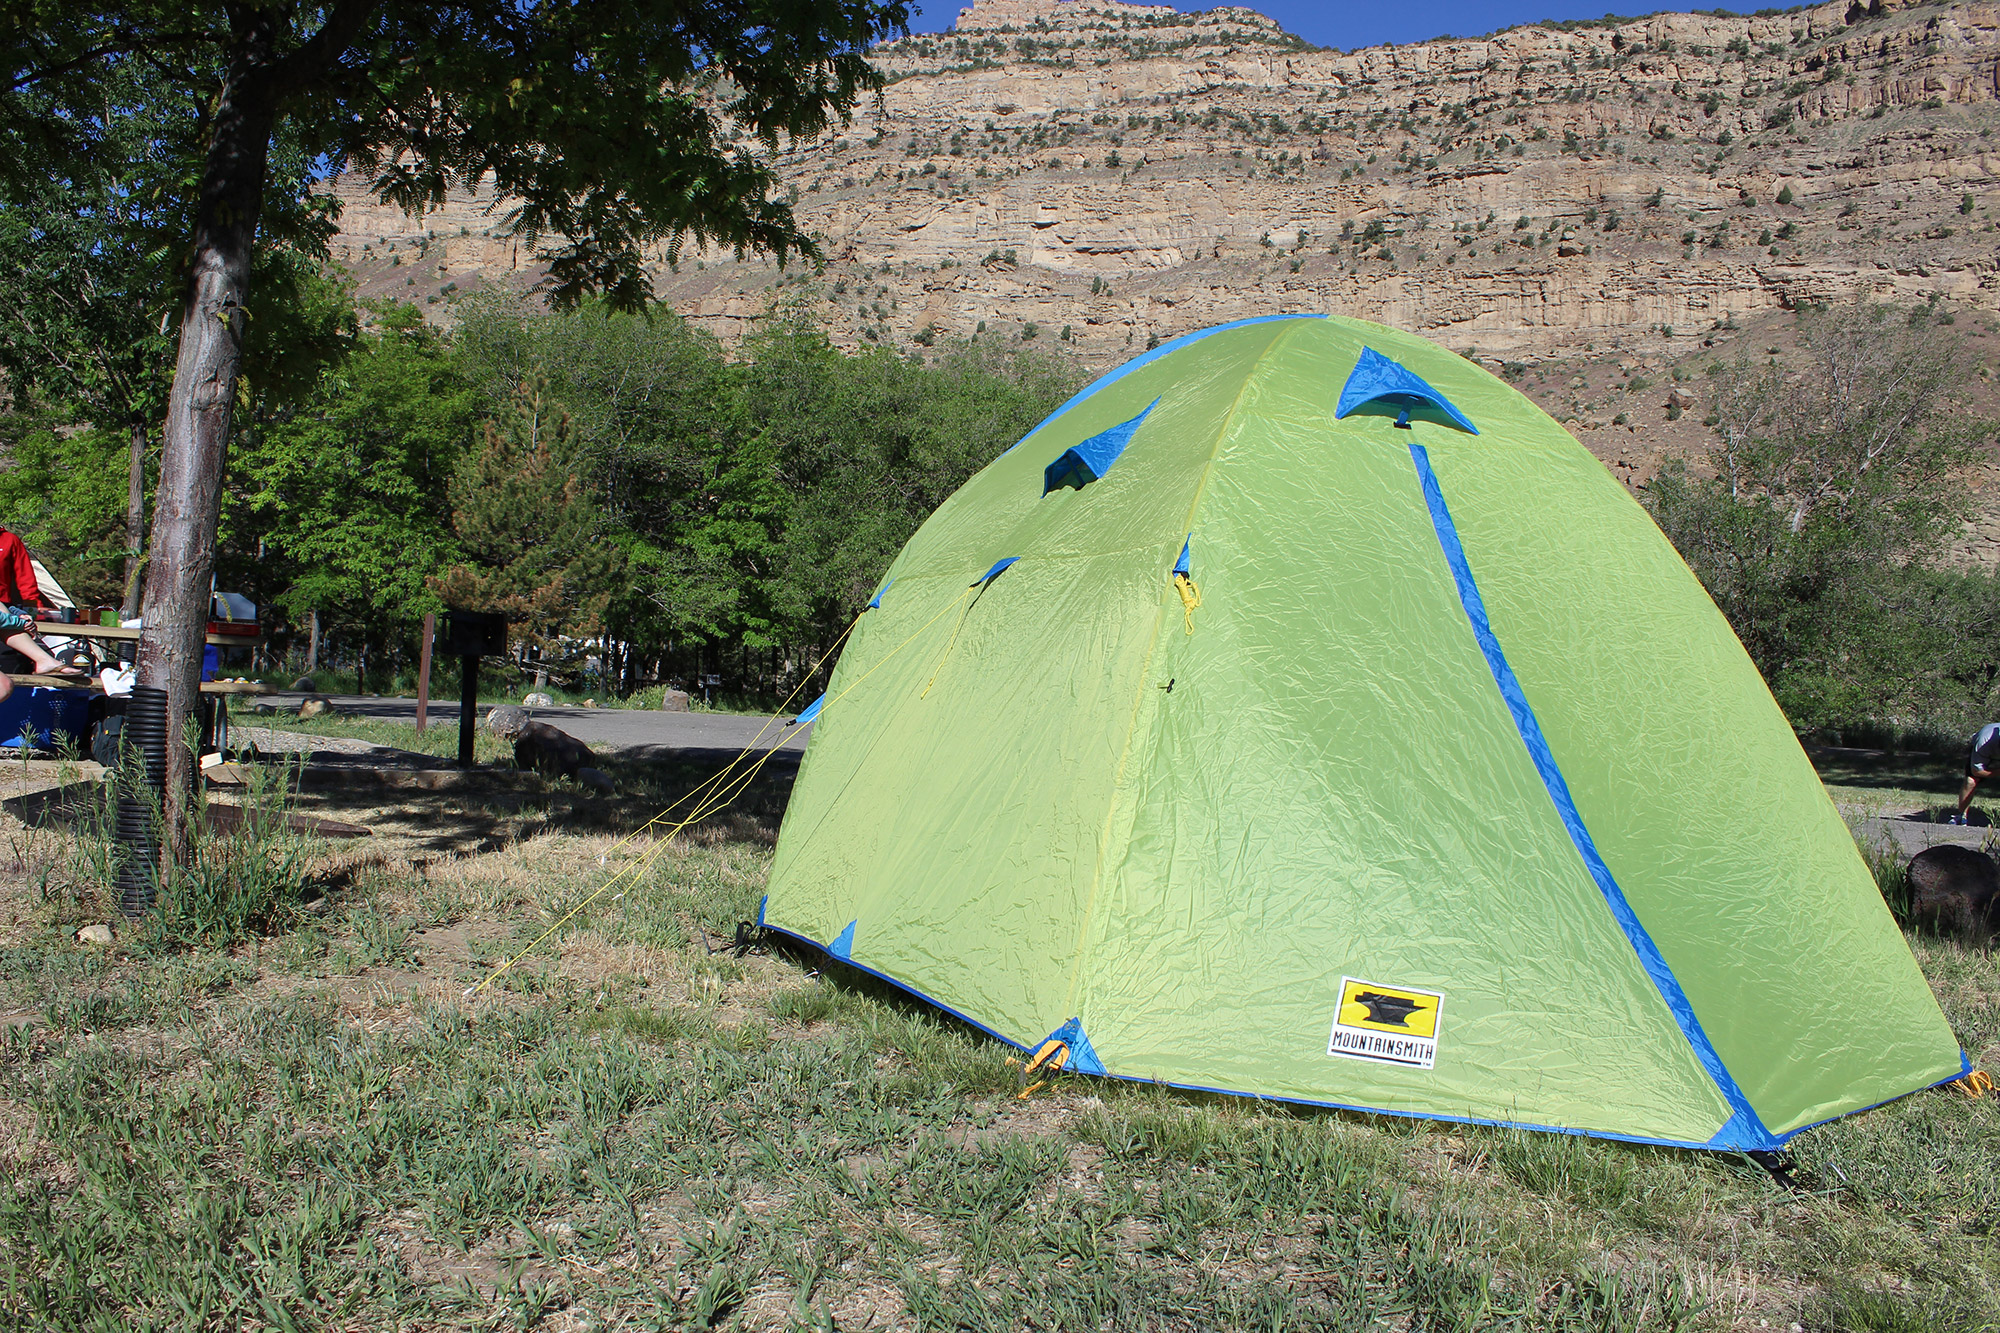 Gently Used Camping Gear - Find Great Gear For Less In Denver | Mountain Side Gear Rental